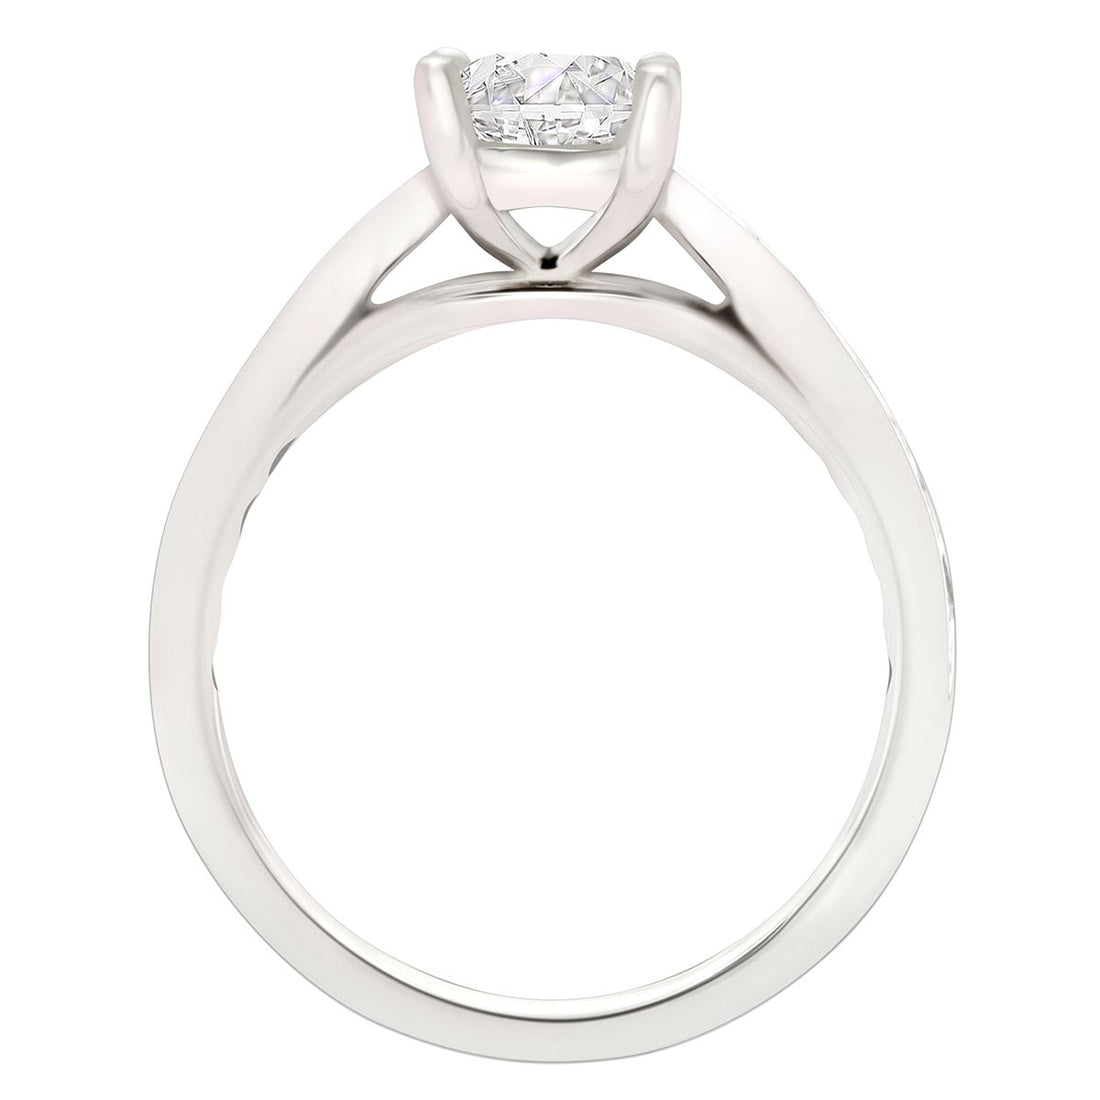 Princess Cut Diamond Solitaire with tapered diamond band in white gold standing upright